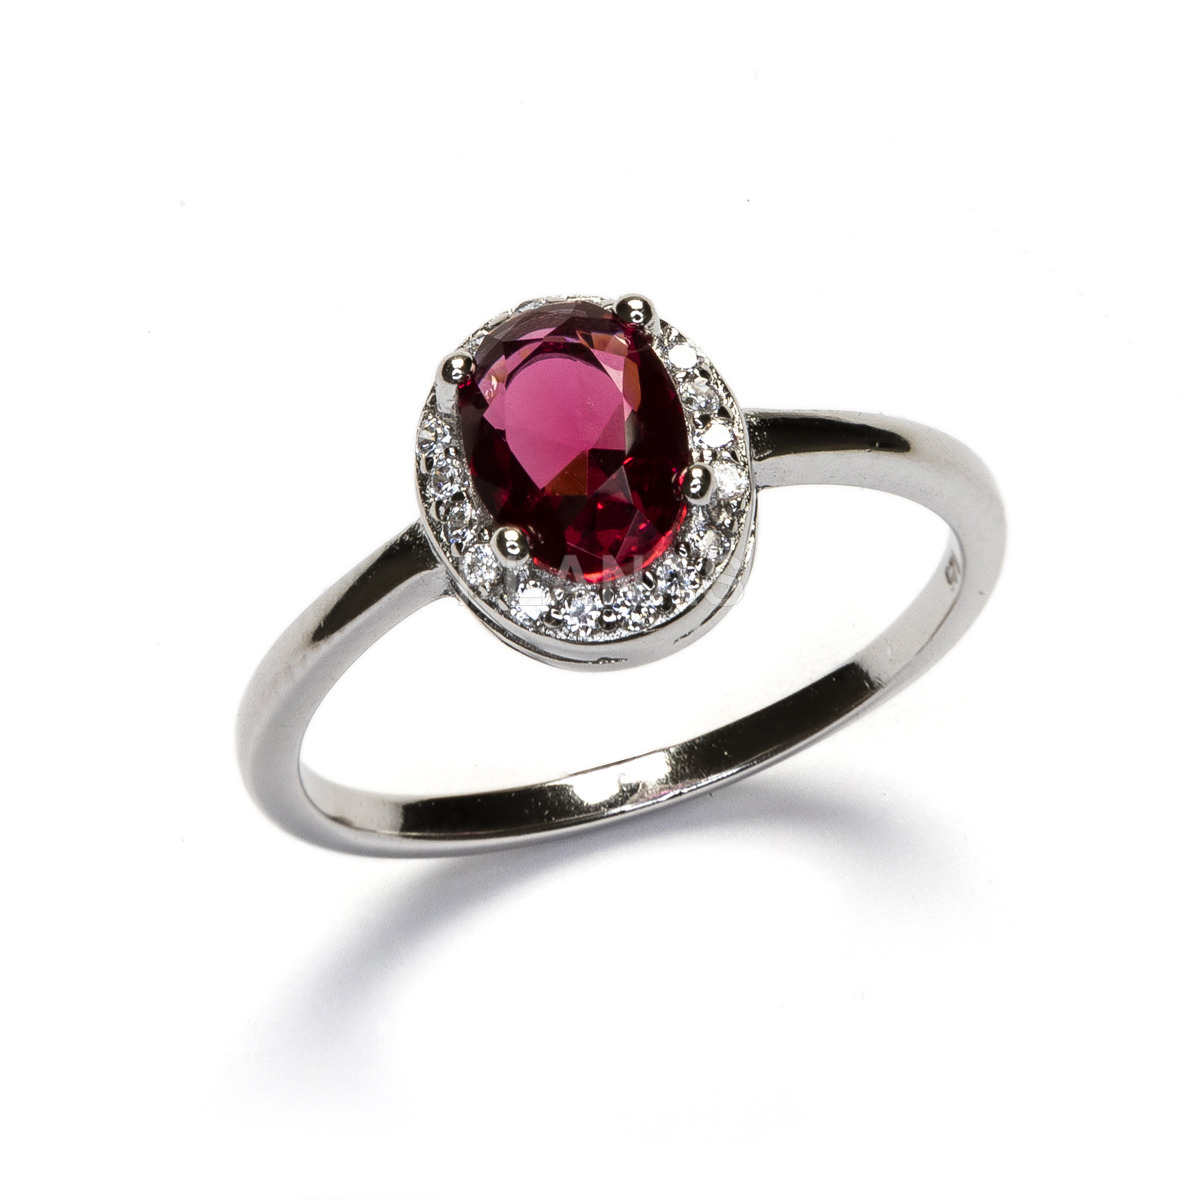 Ring in rhodium plated sterling silver and cubic zirconia in ruby.